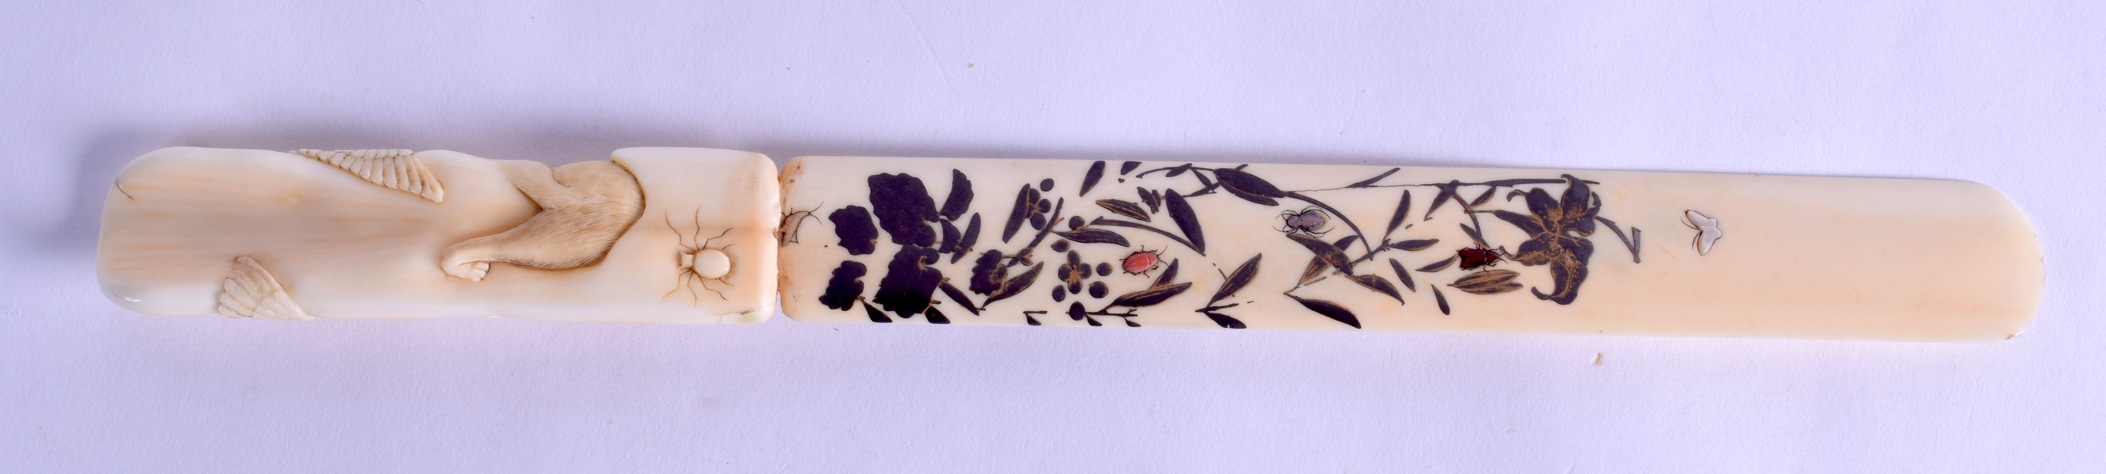 A 19TH CENTURY JAPANESE MEIJI PERIOD CARVED IVORY SHIBAYAMA INLAID PAPER KNIFE with amusing ivory - Image 2 of 2